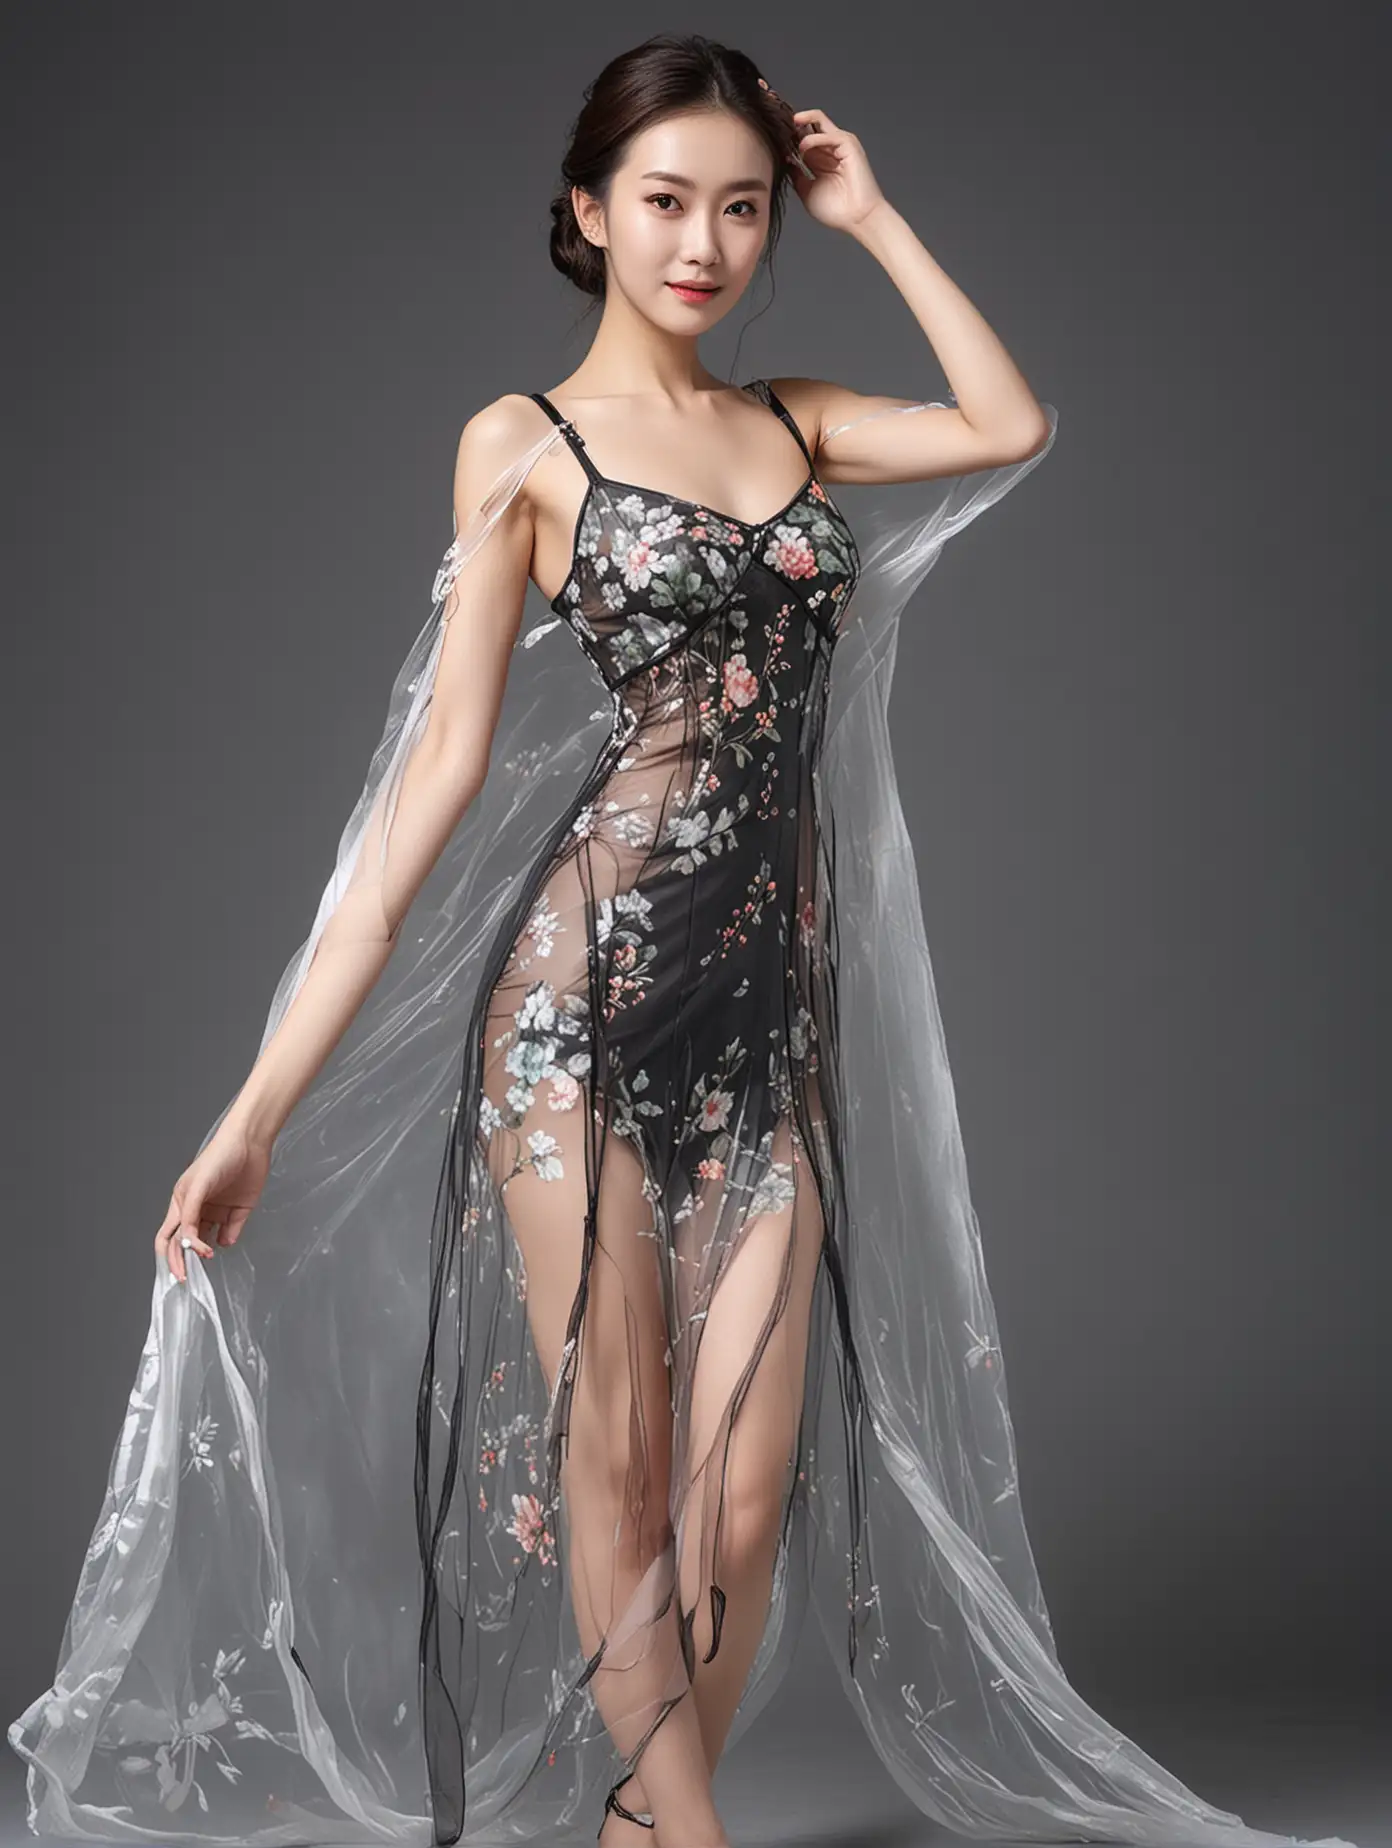 Elegant-Woman-in-Anhui-Strap-Dress-with-Sheer-Fabric